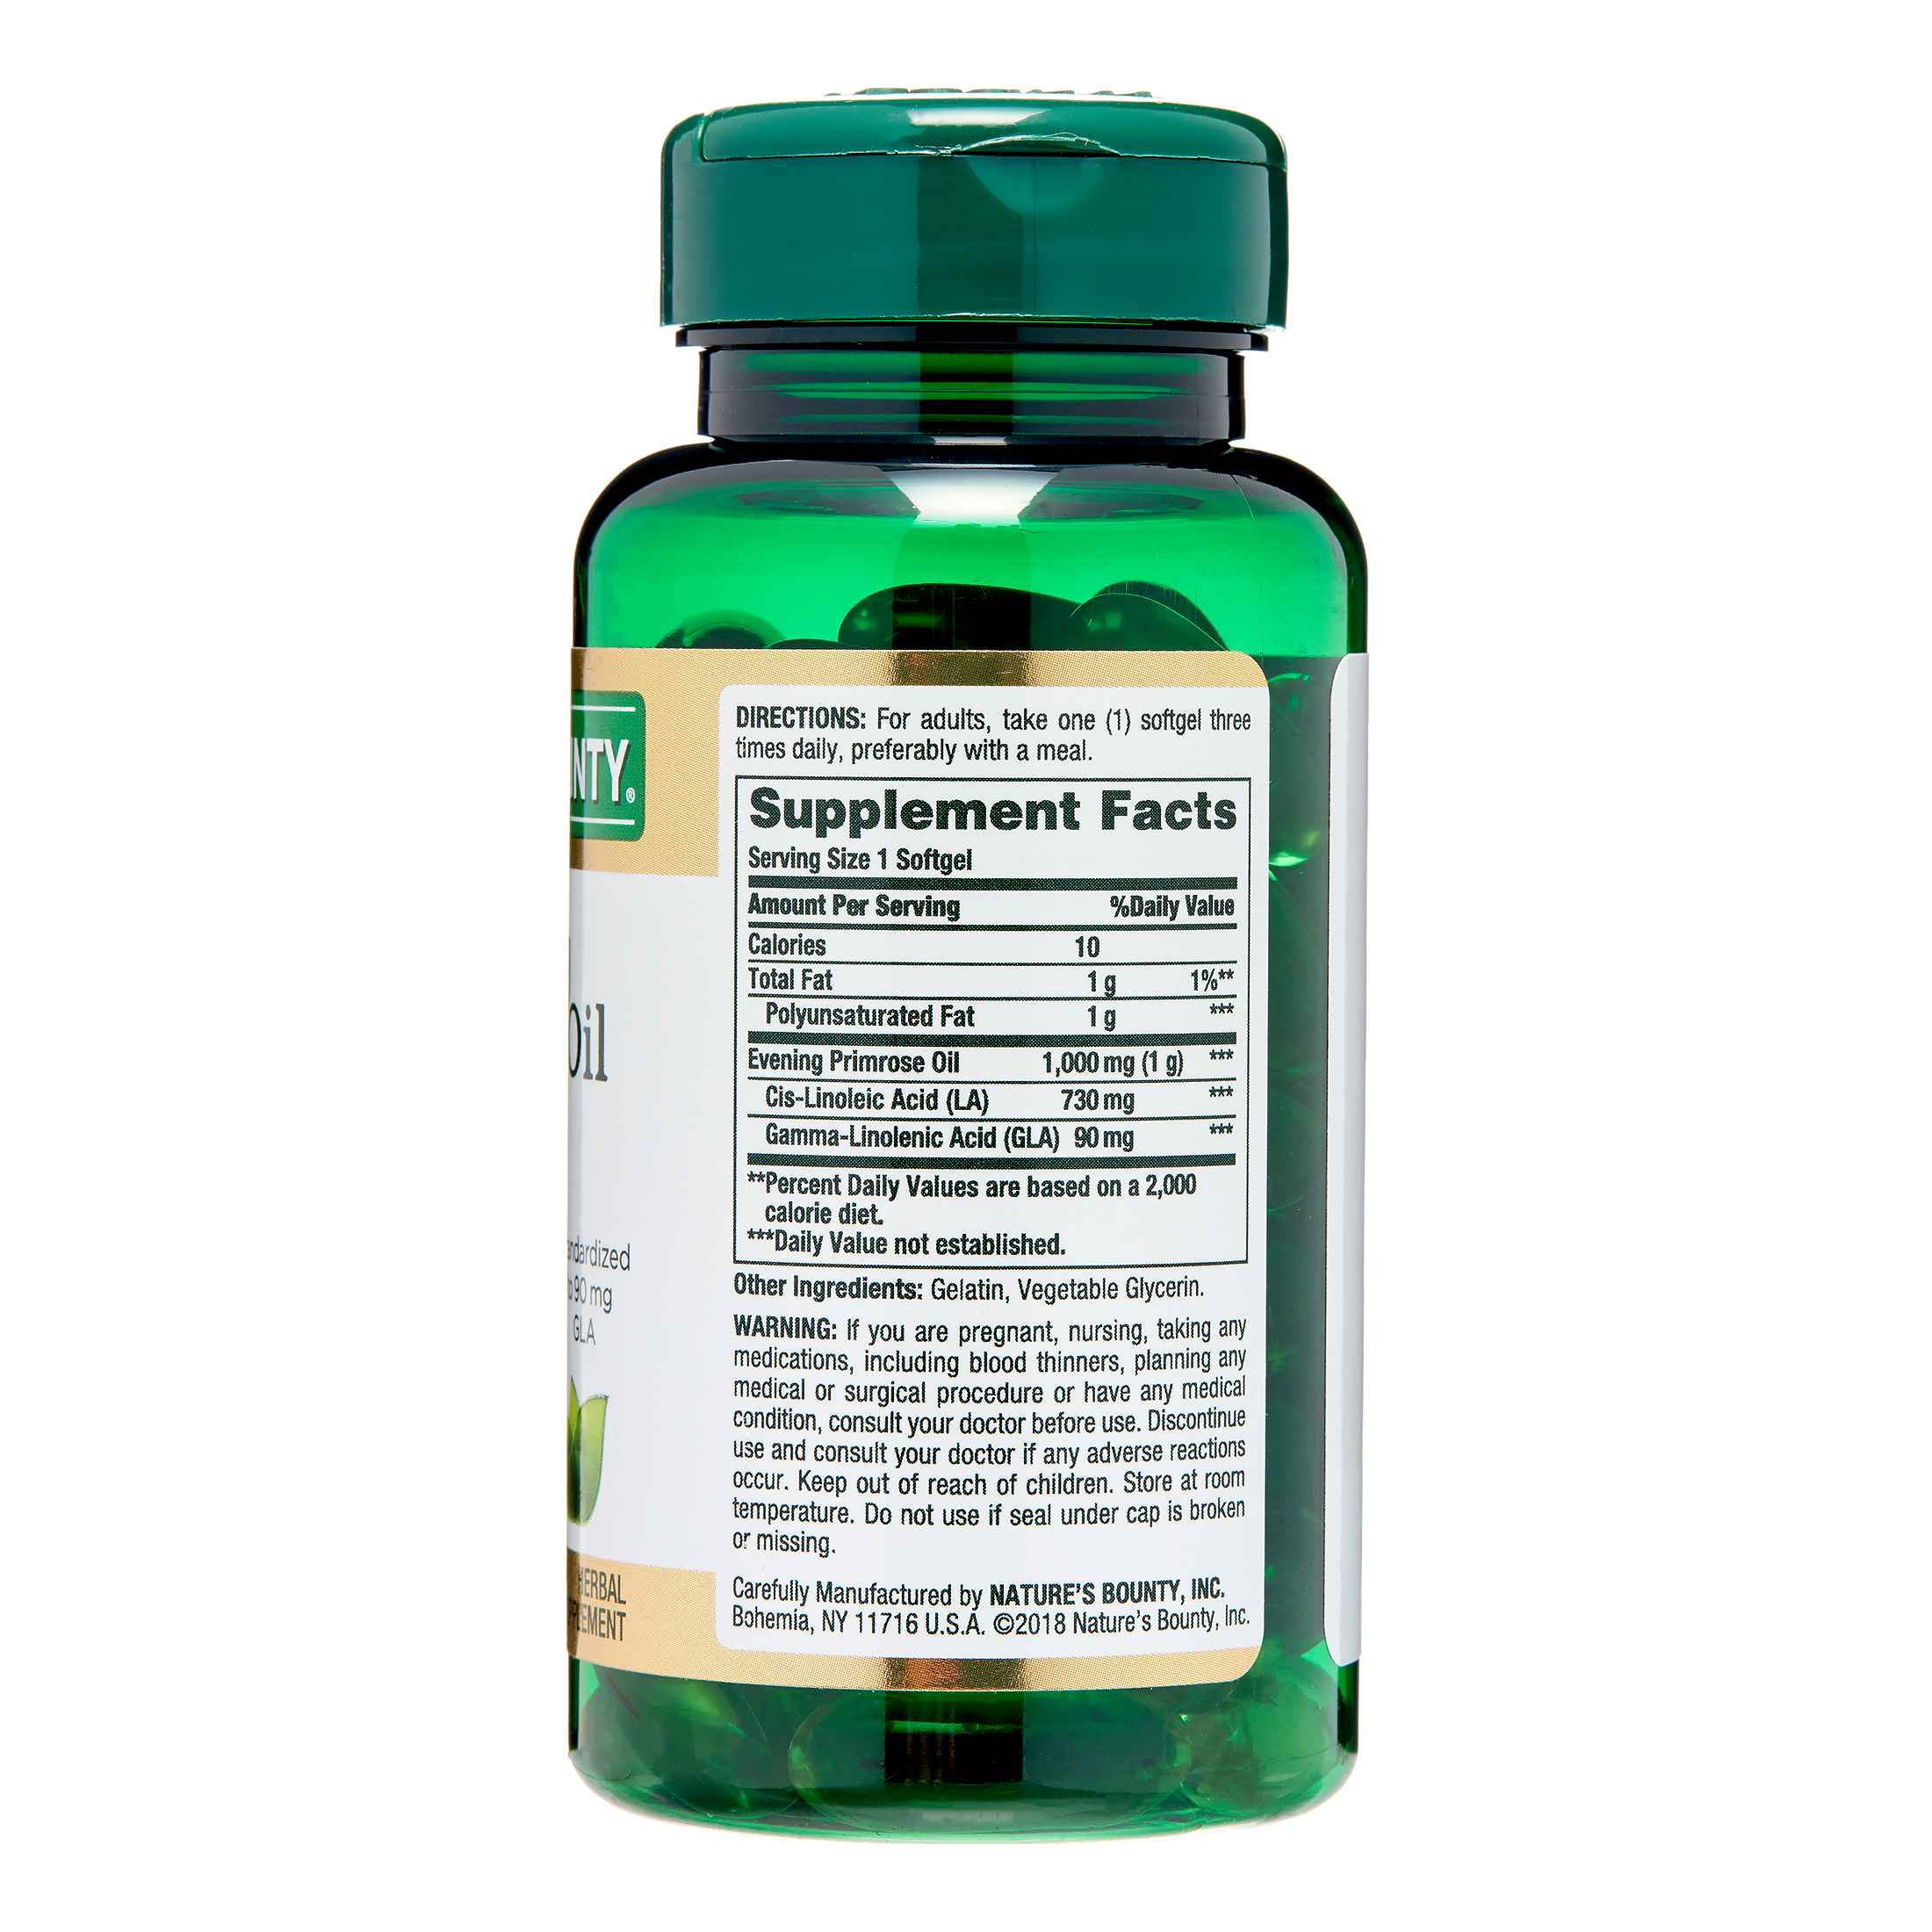 Nature's Bounty Evening Primrose Oil Softgels, Herbal Supplement, 1000 Mg, 60 Ct - image 3 of 8